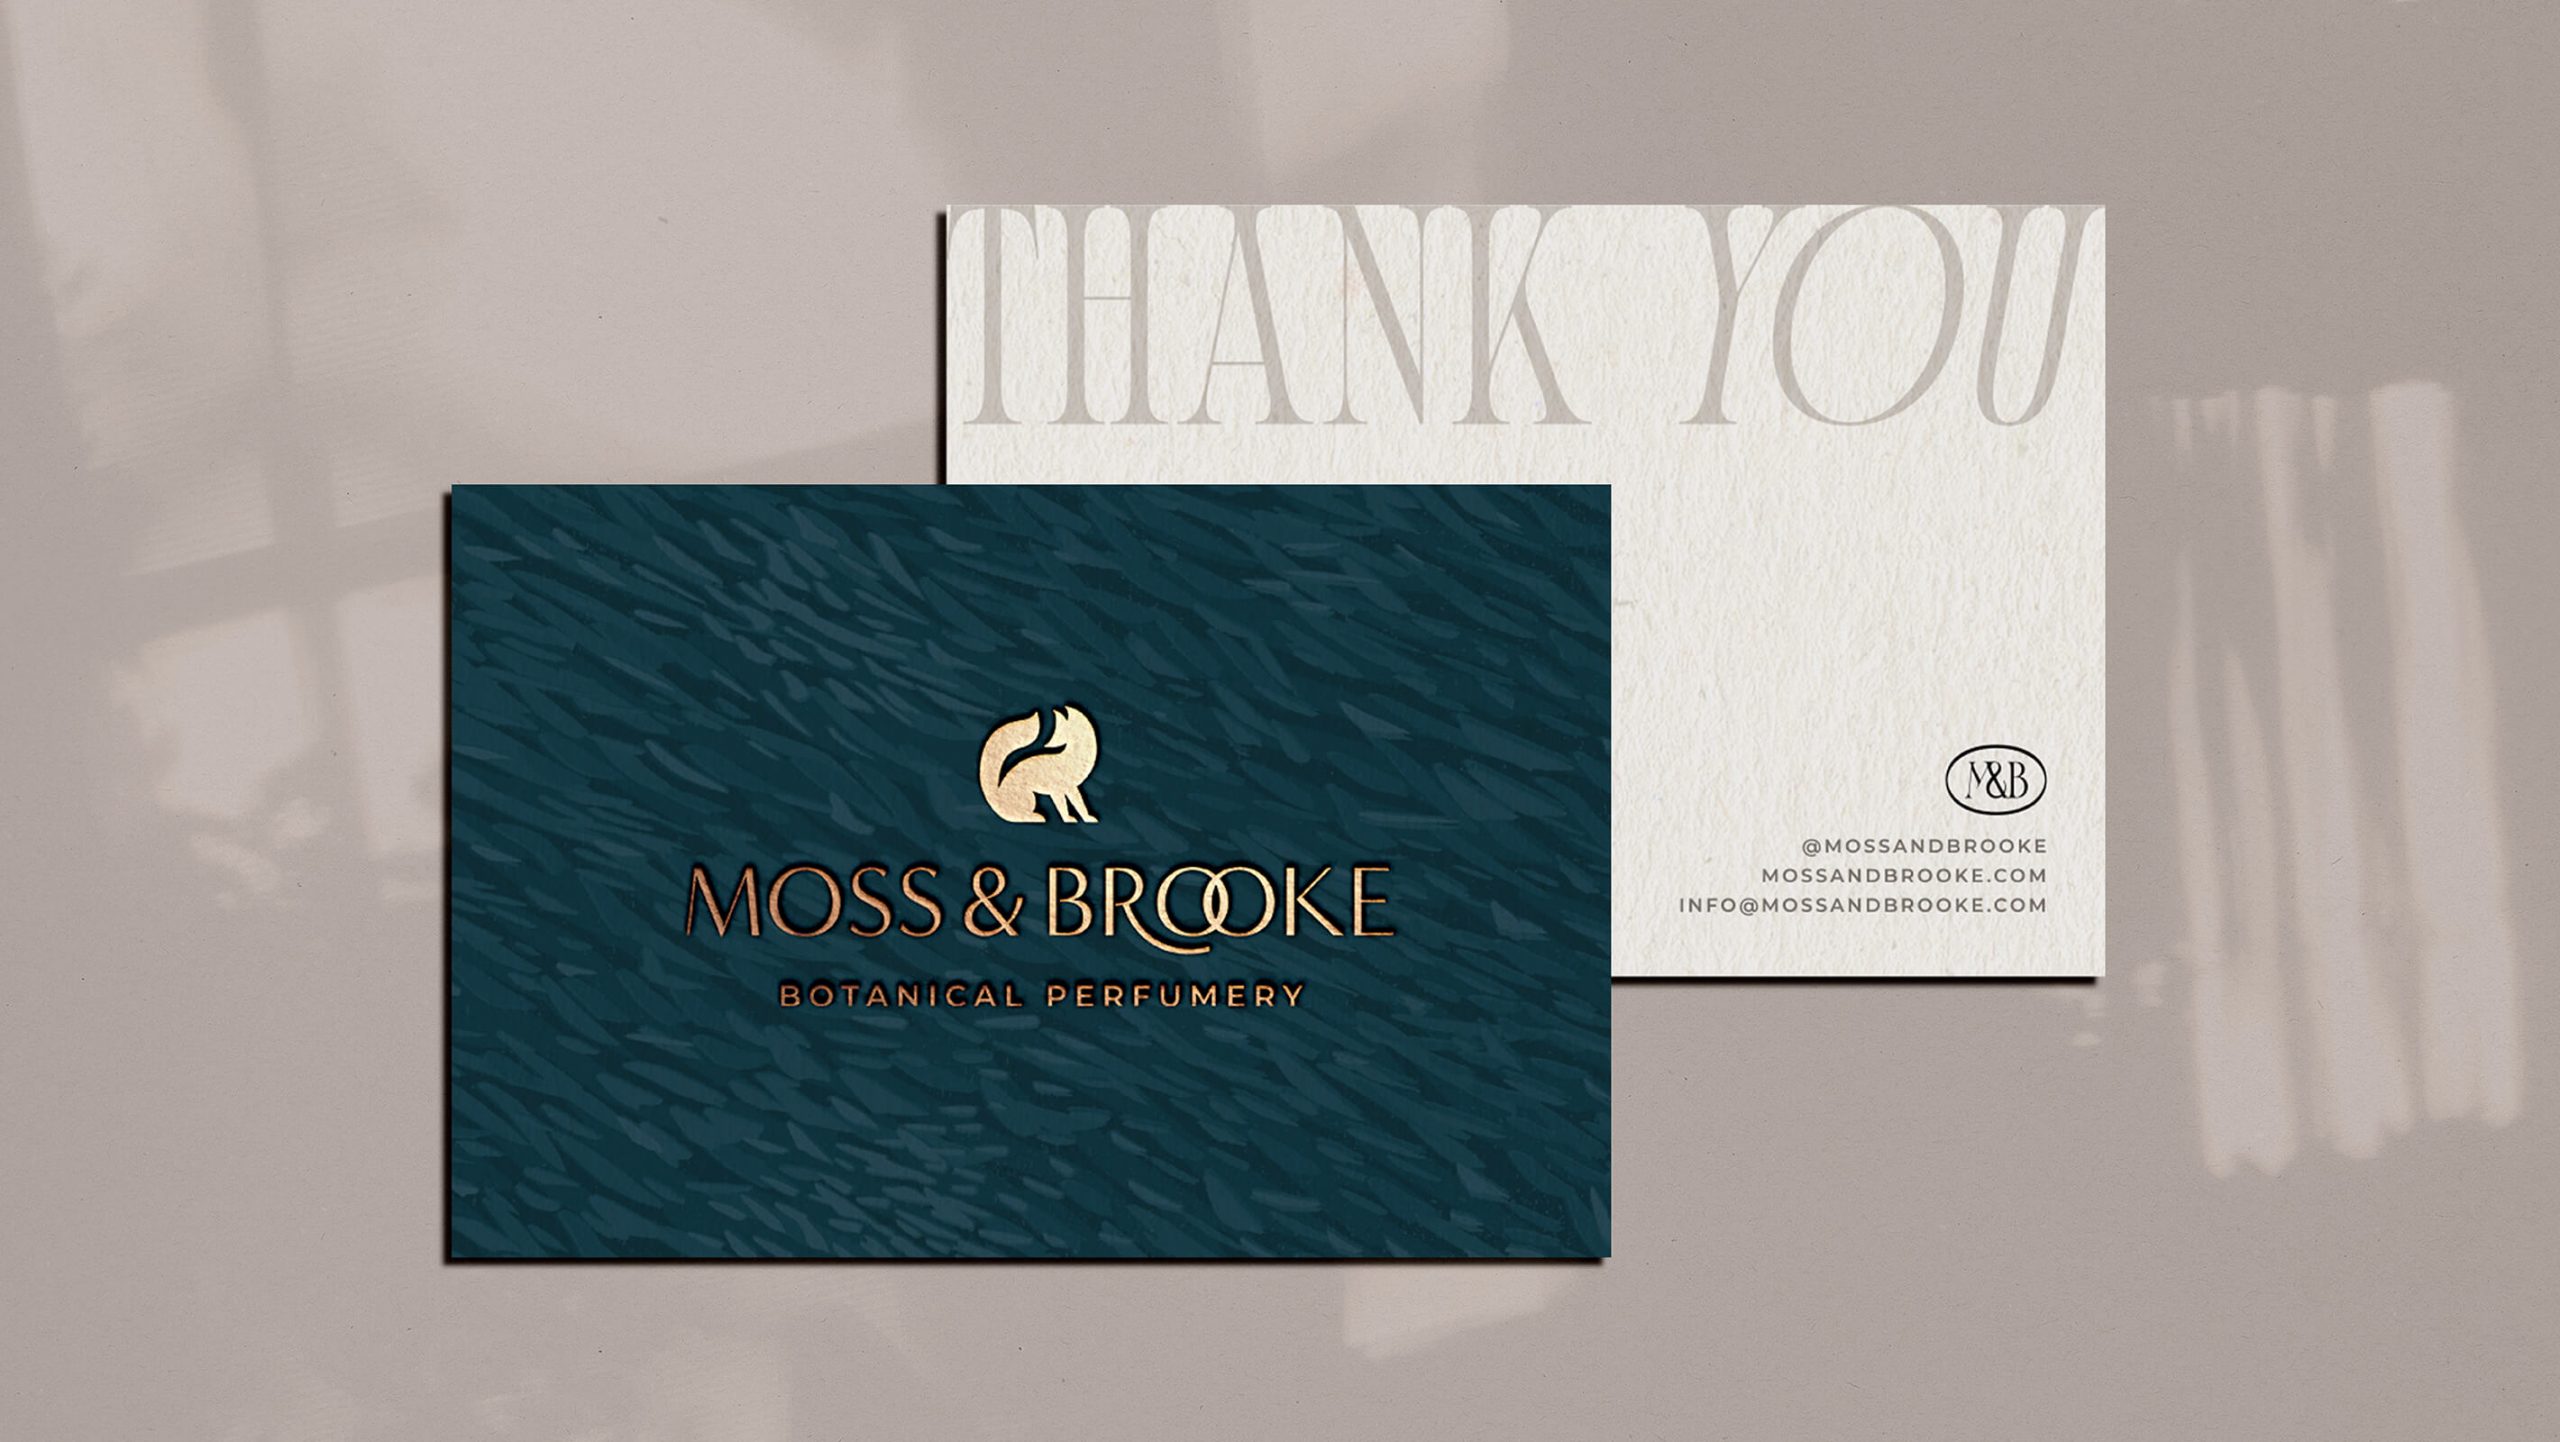 unique strategic brand identity design for botanical perfumery moss and brooke. The gold foil custom thank you cards feature linoprint textures, elegant typography and a fox icon